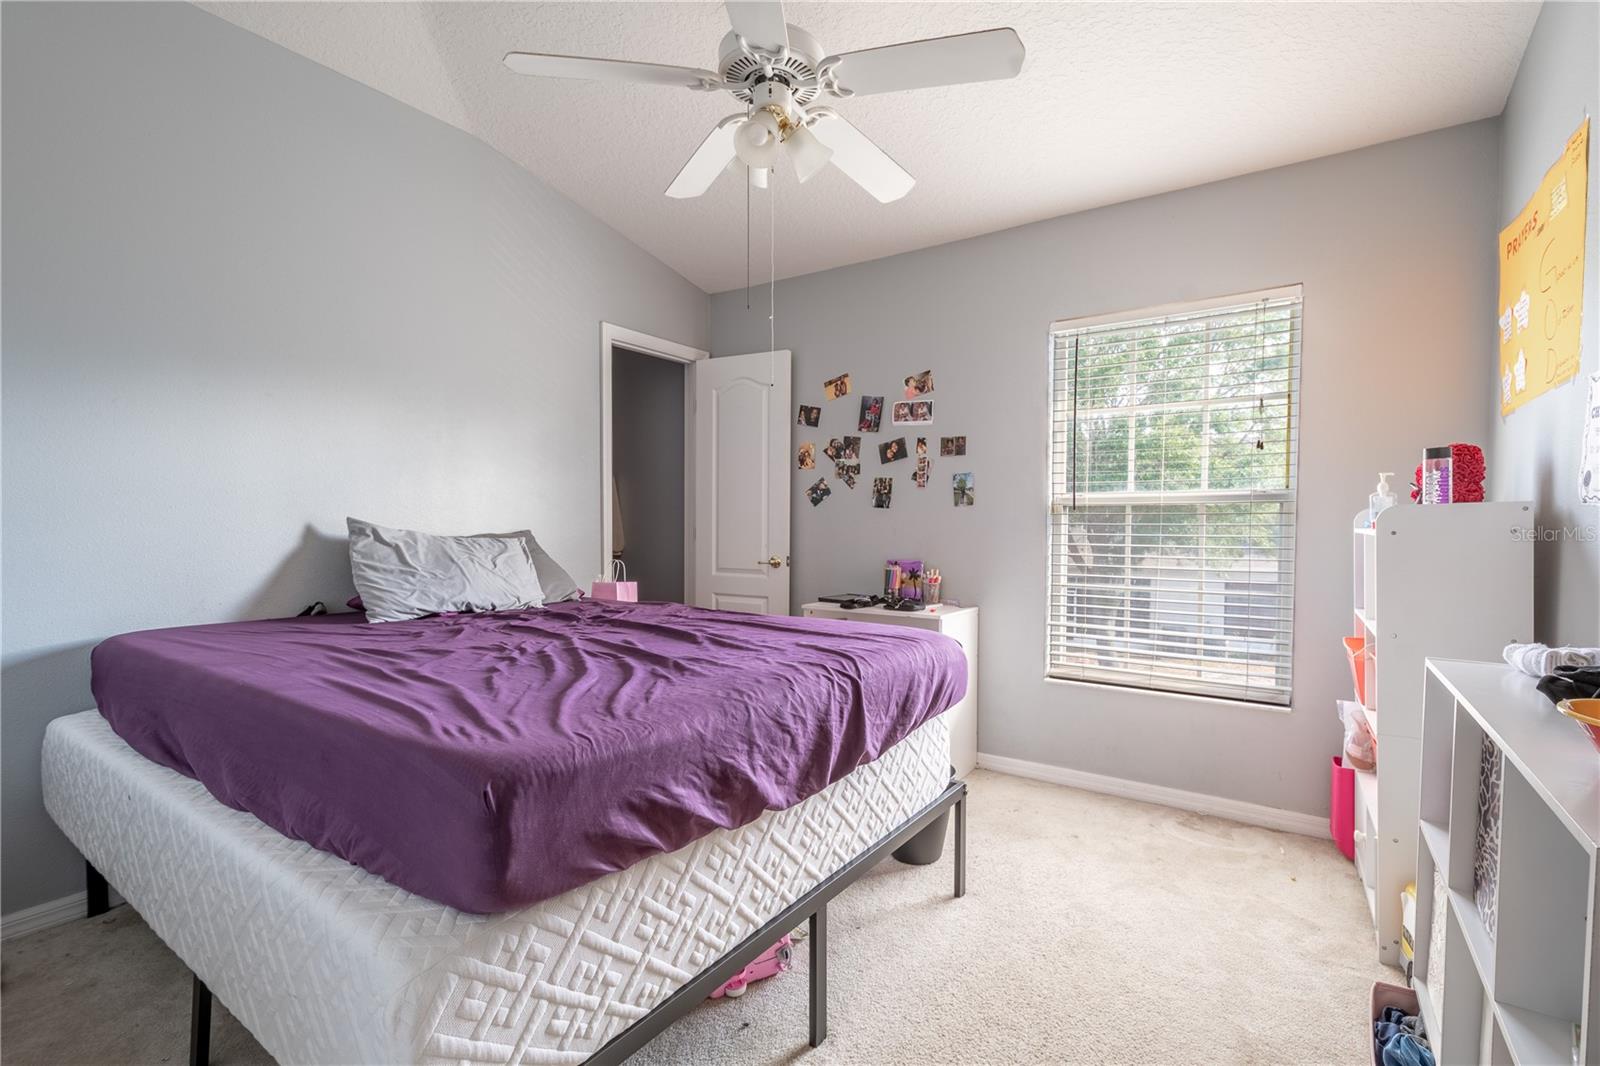 Bedroom  2 features carpet, a ceiling fan, neutral color palette and a walk in closet.